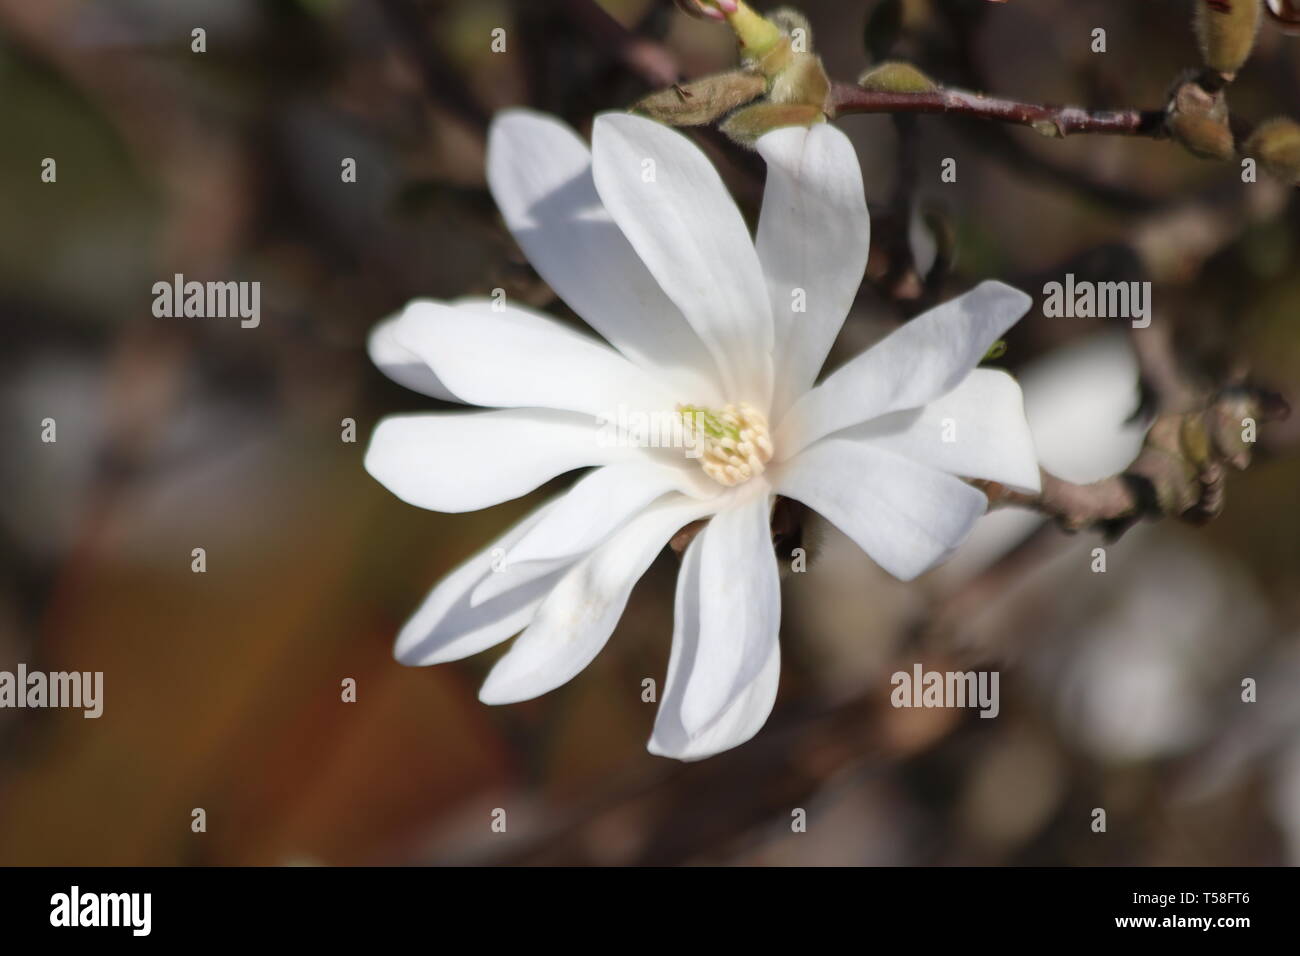 Magnolia Stellata or Royal star with big white flowers during springtime in a garden Stock Photo